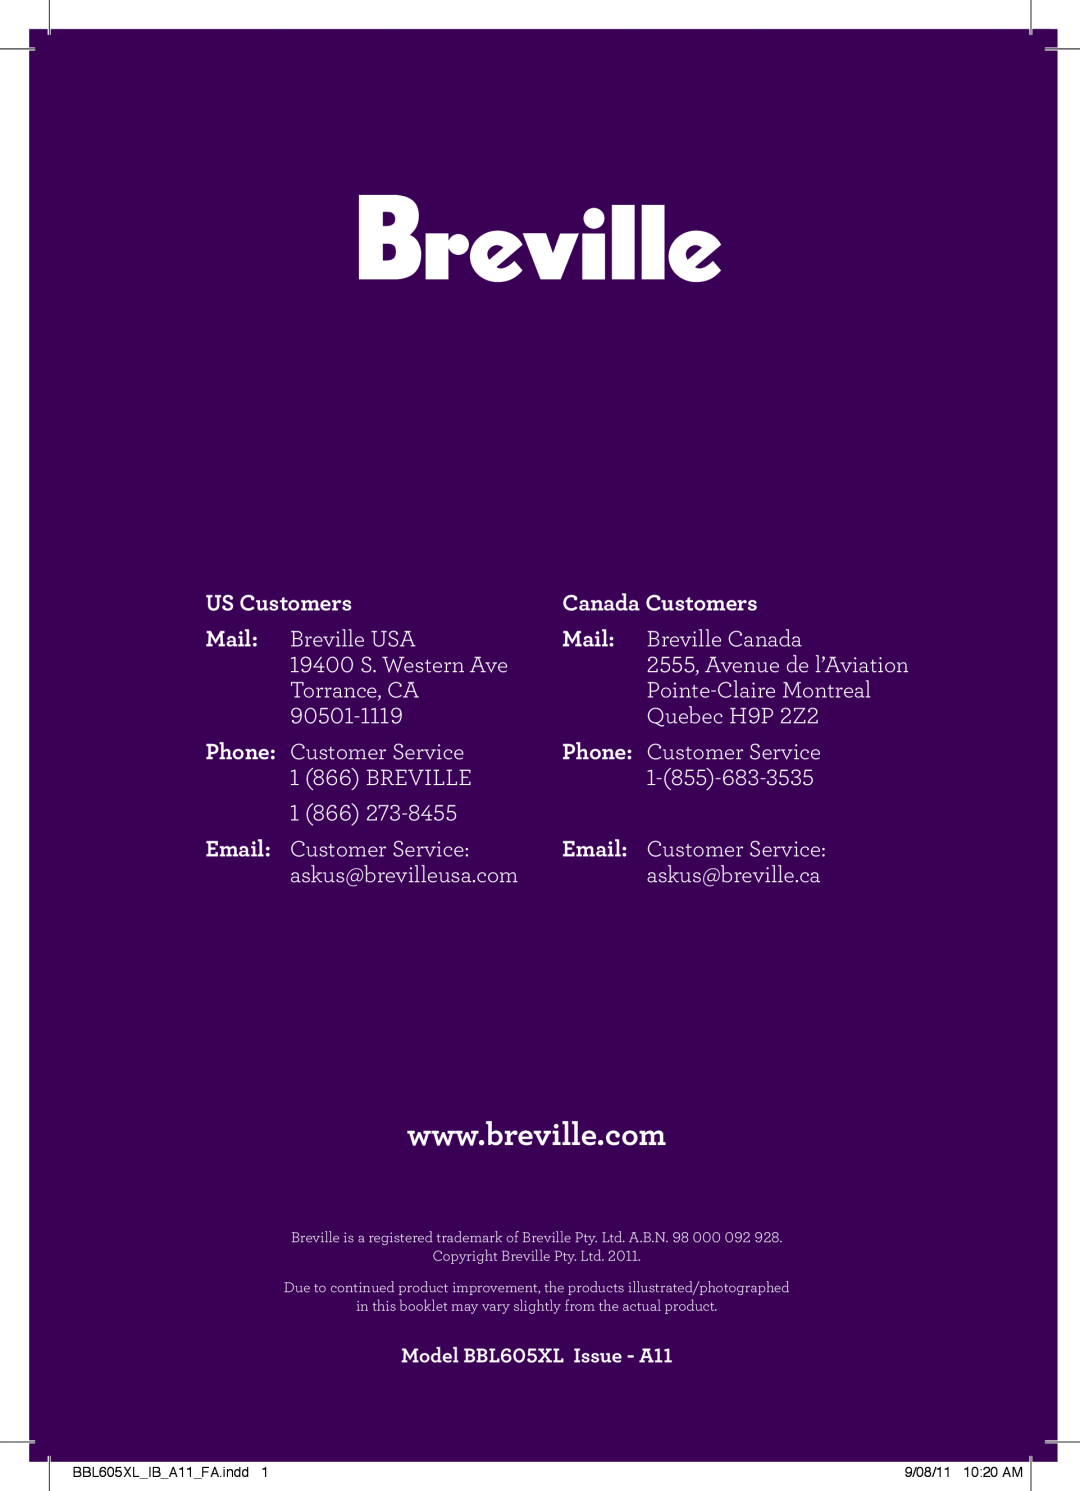 Breville BBL605XL manual US Customers, Canada Customers, Mail, Email 